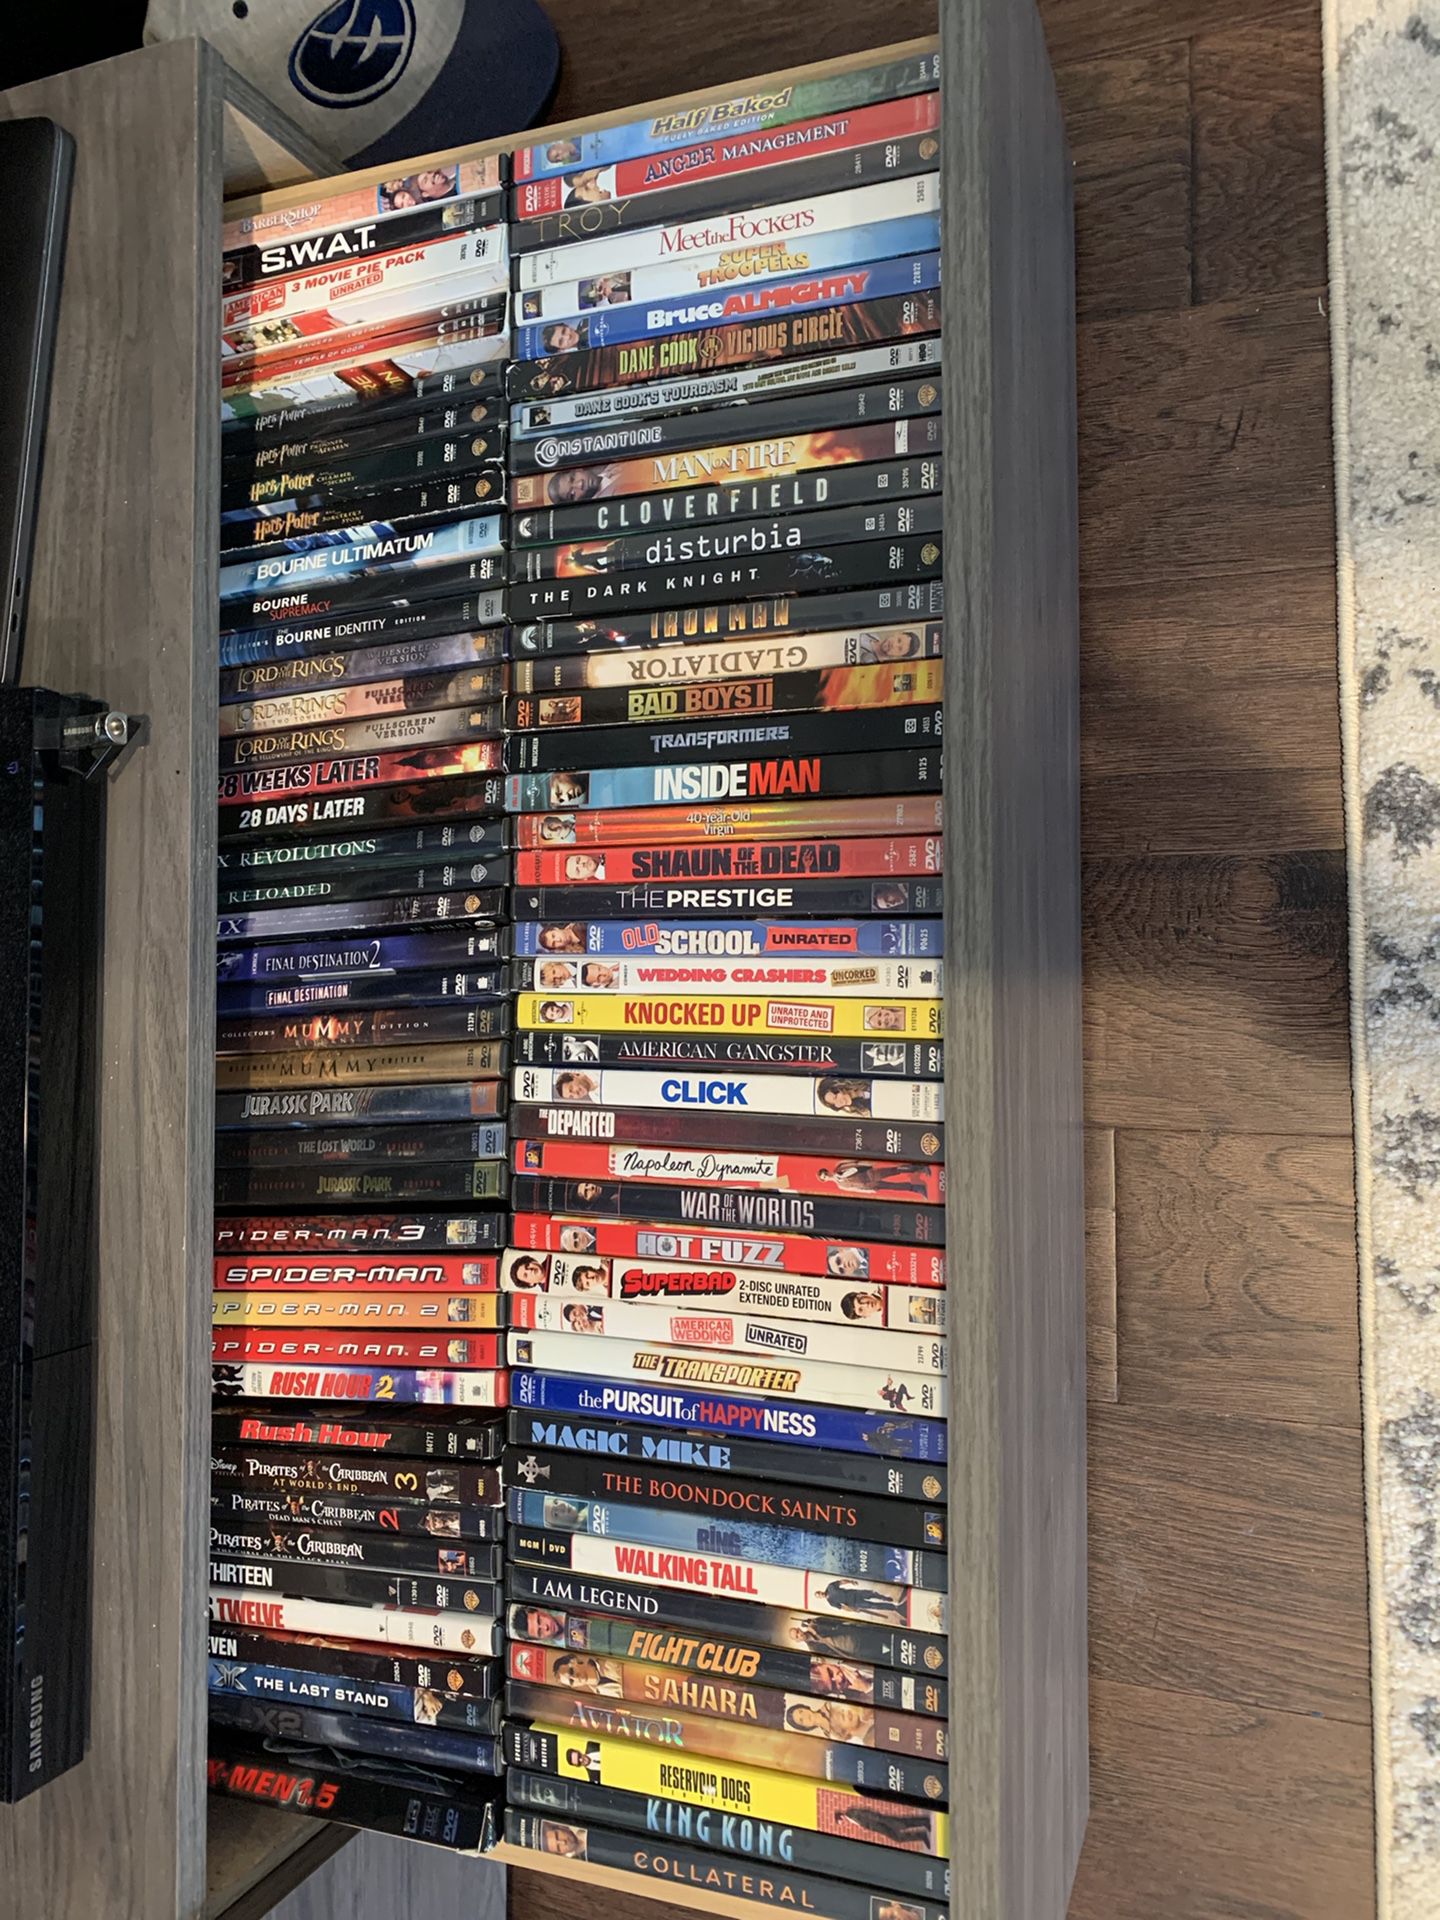 (MASS LOT OF ITEMS) 100+ DVD’s/boxed sets + Samsung 3D Blu-ray glasses/player/dvds + LG Blu-ray player